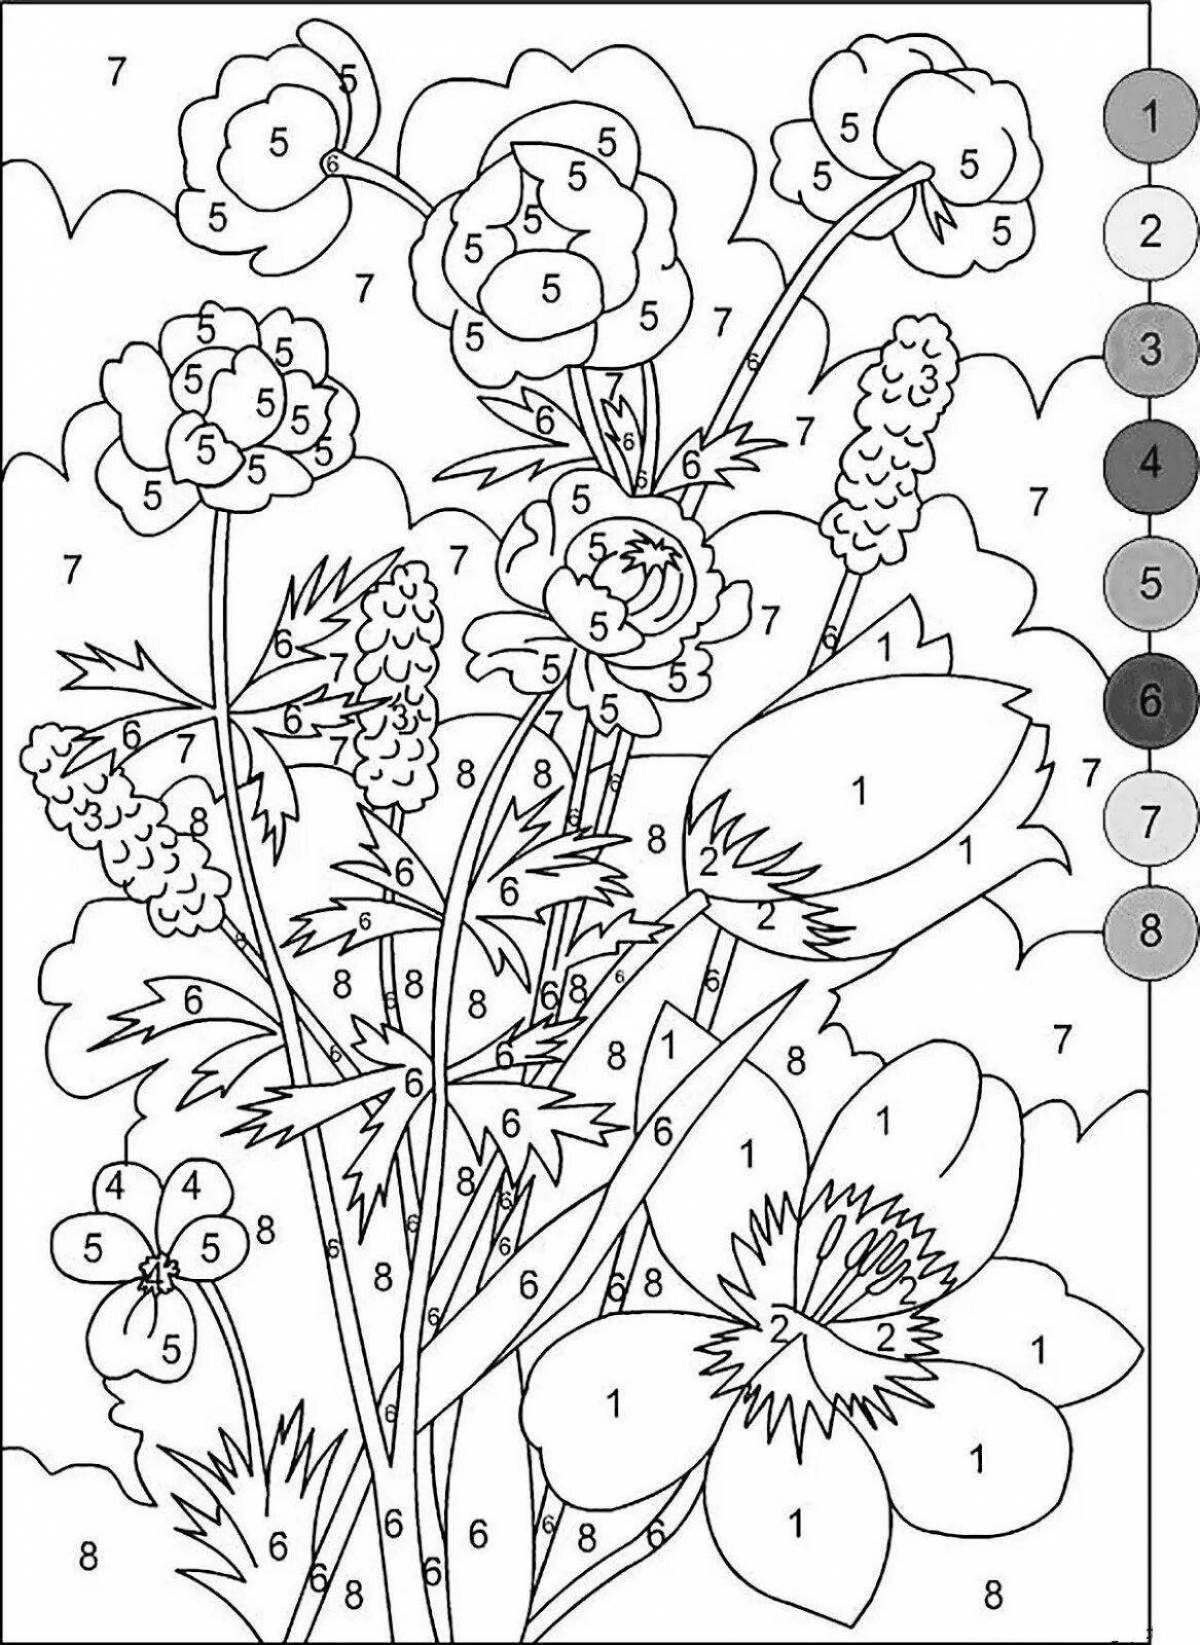 Playful coloring flowers for children 7 years old